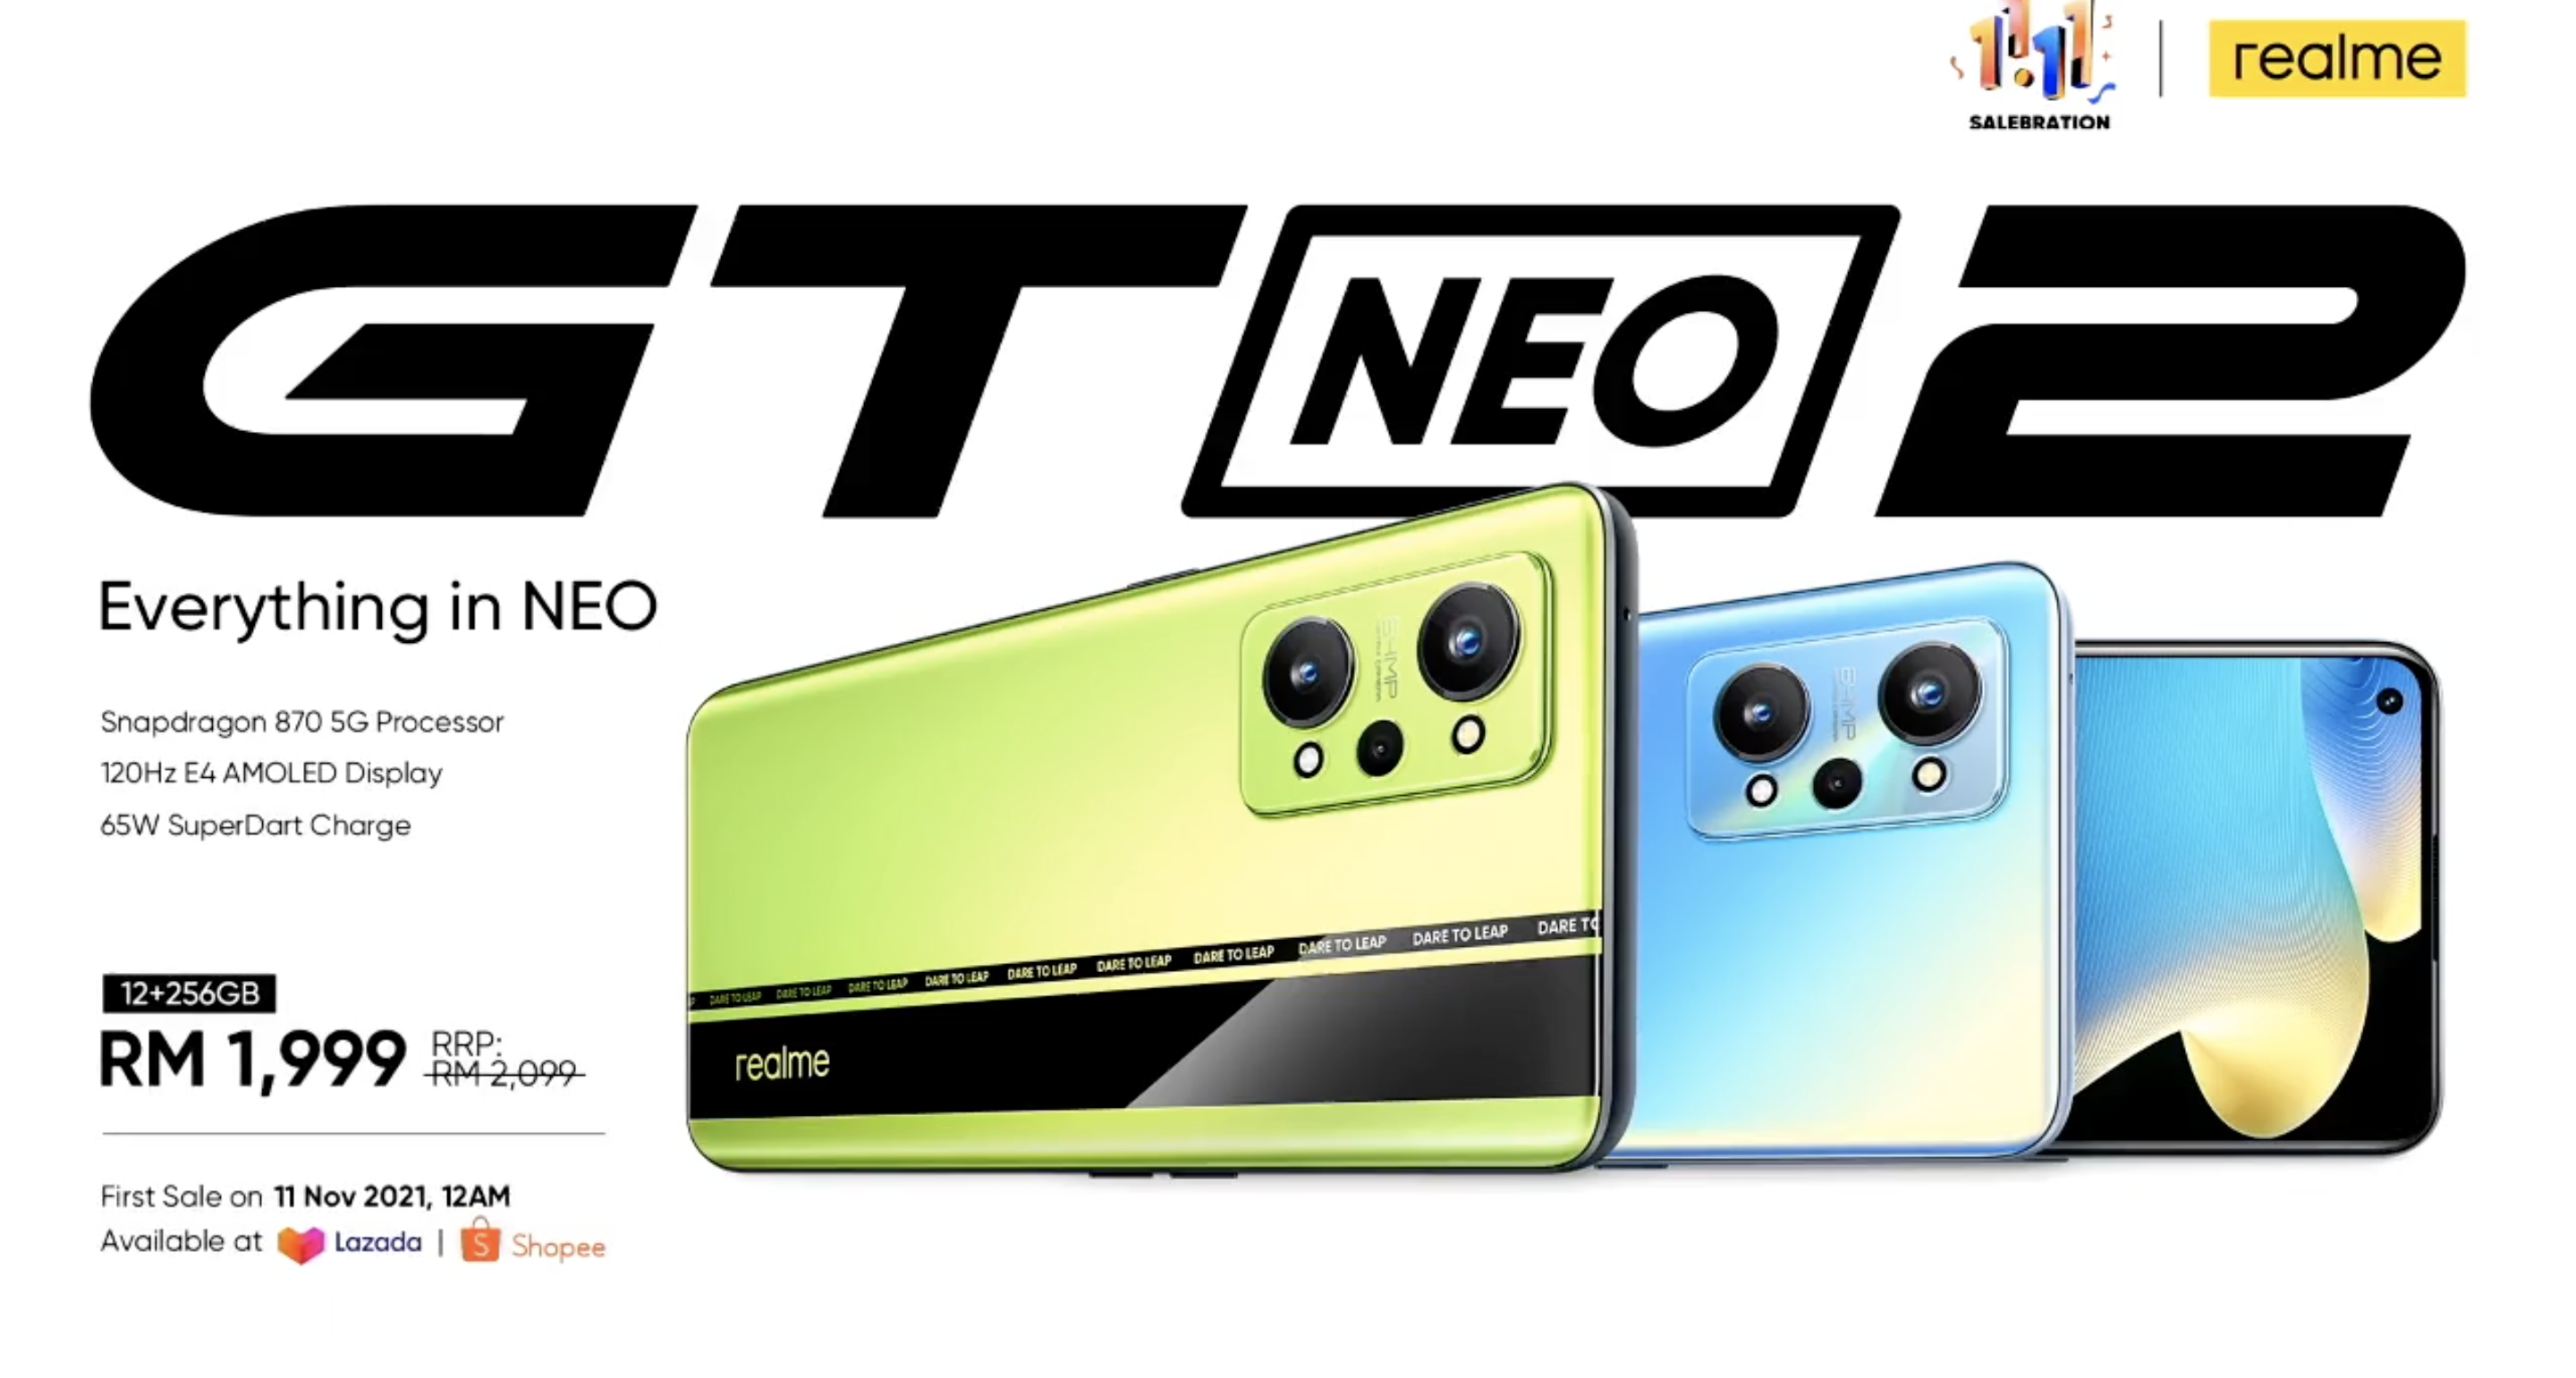 GT Neo2 Pricing